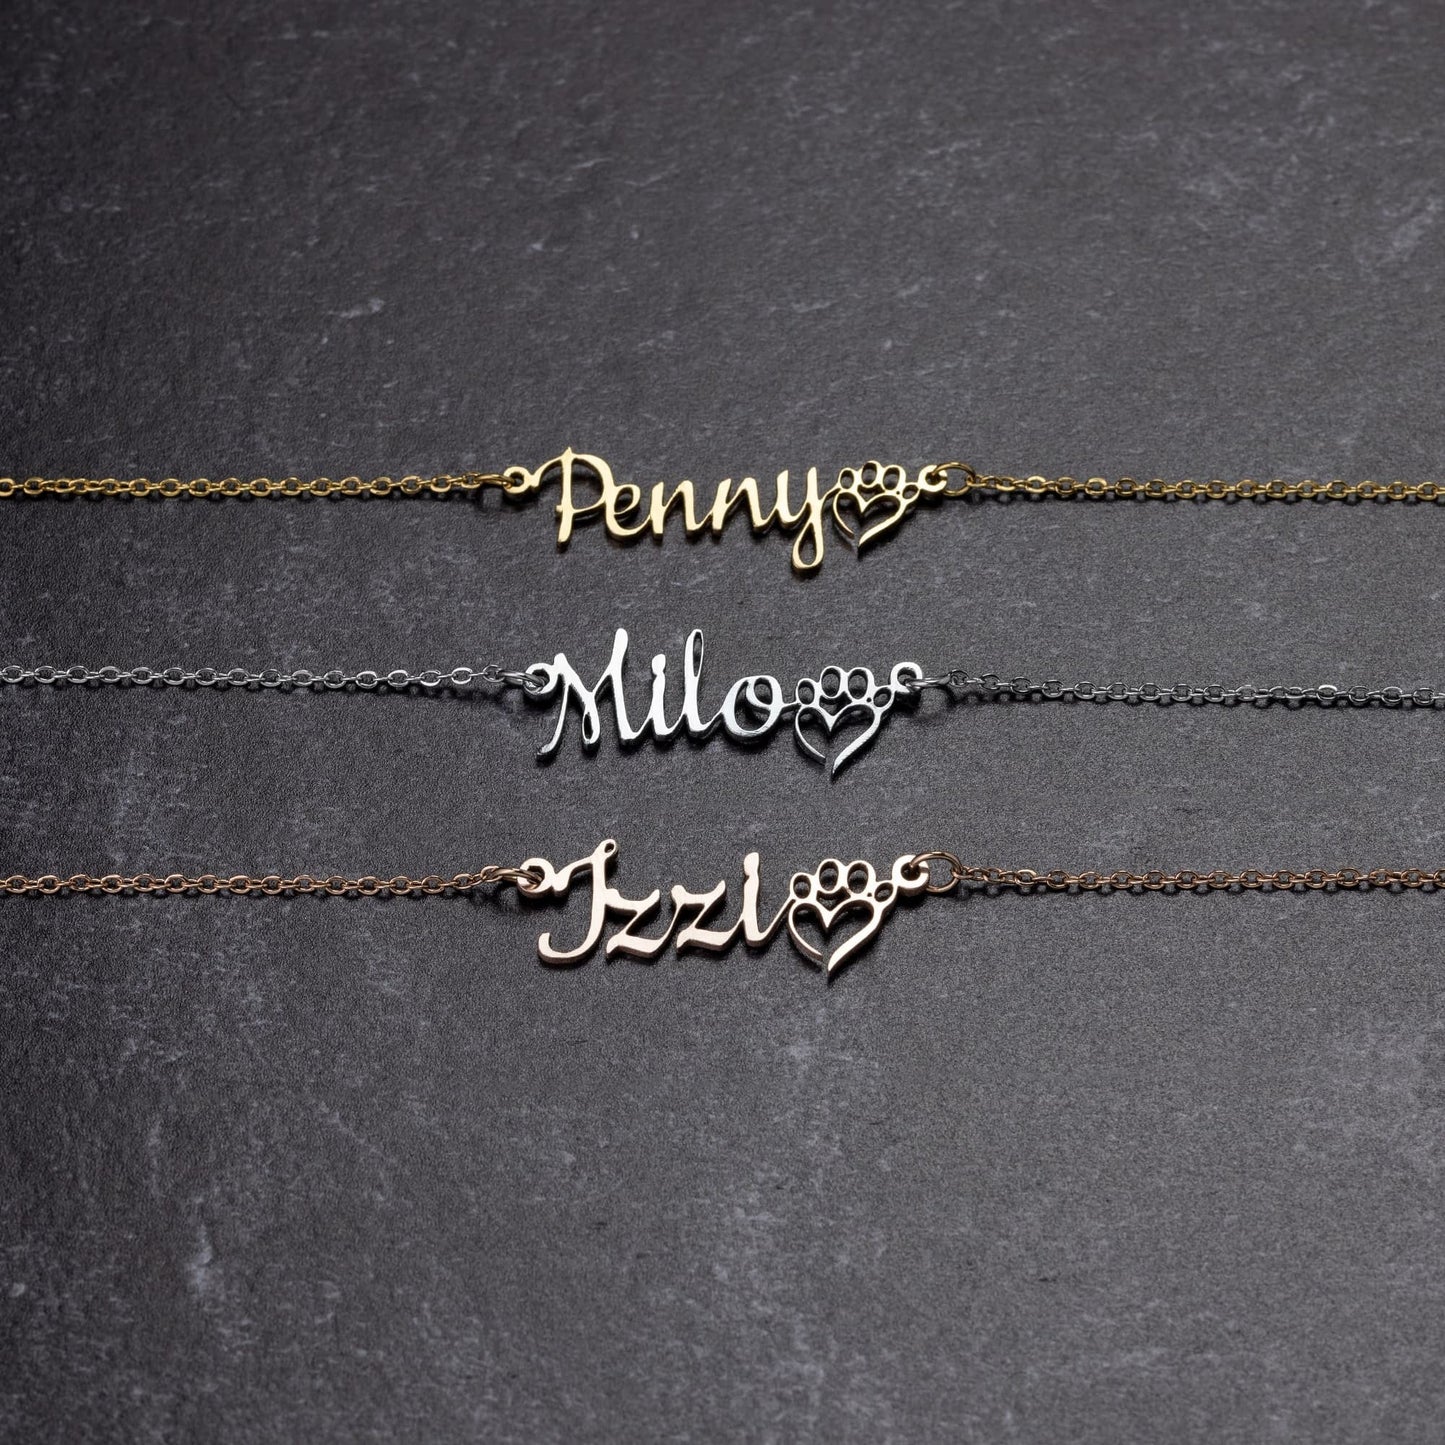 custom name necklace with paw - The muggin shop